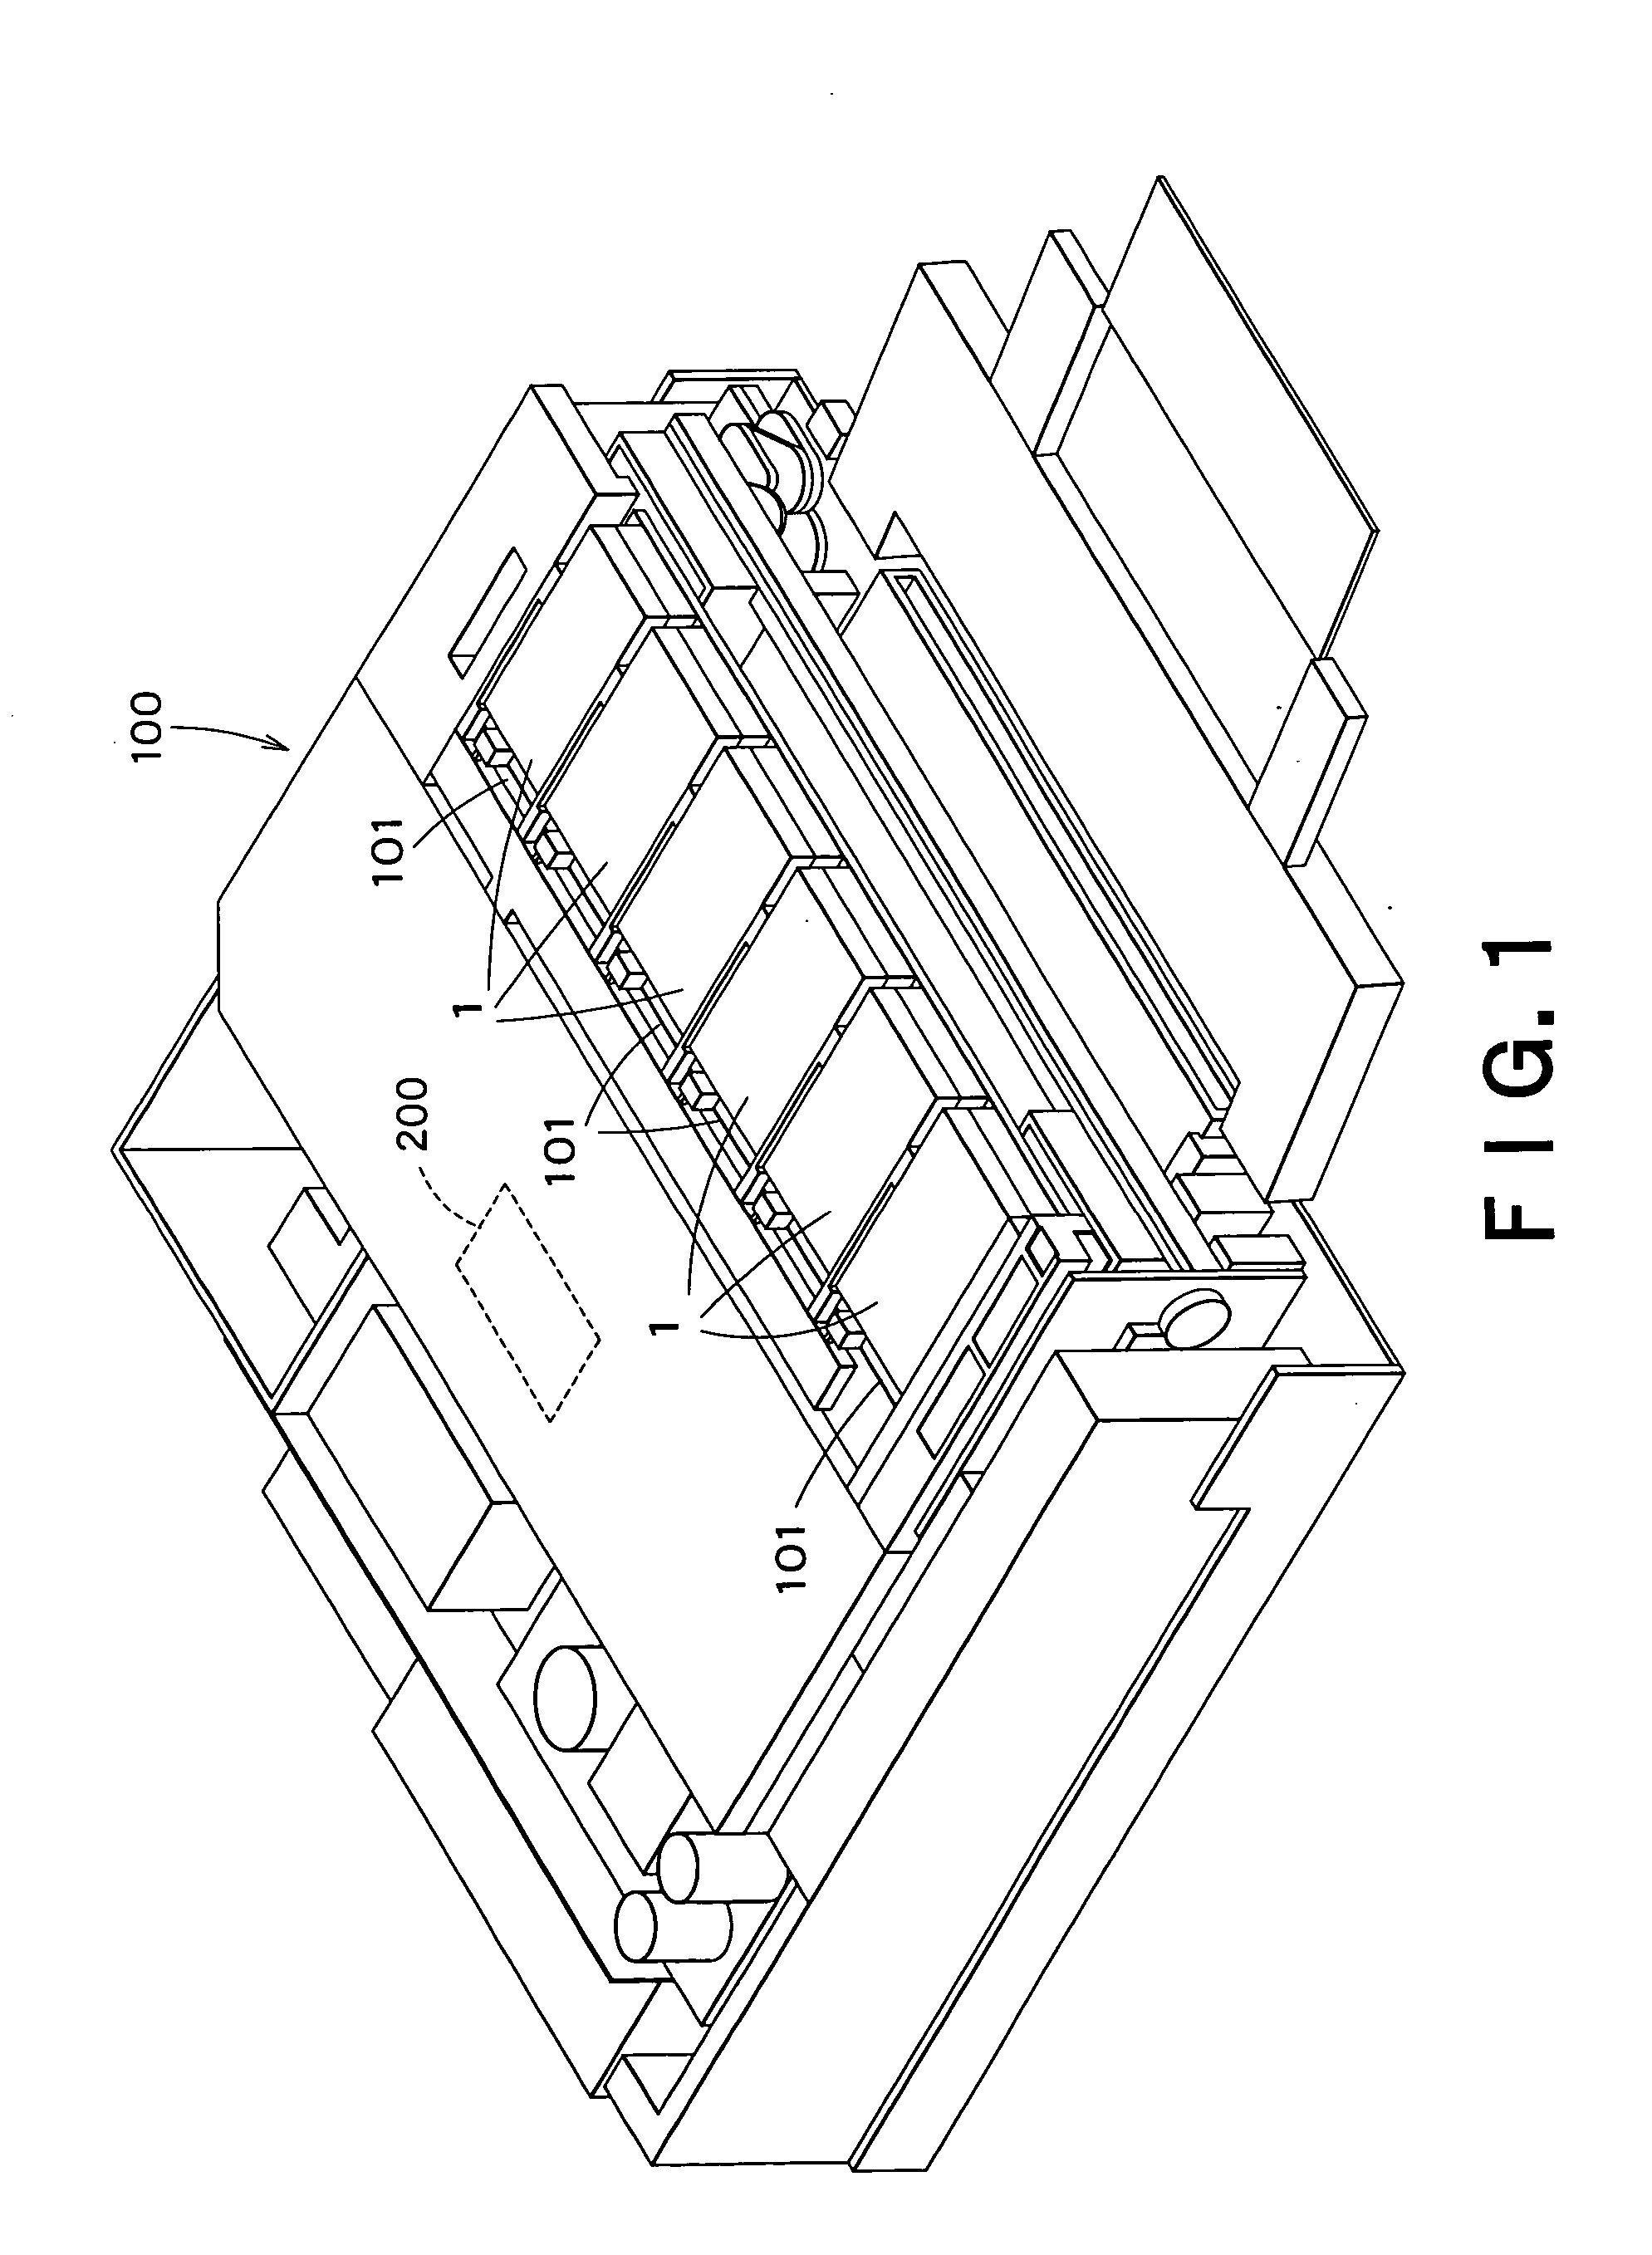 Liquid ejecting apparatus and liquid container holder thereof